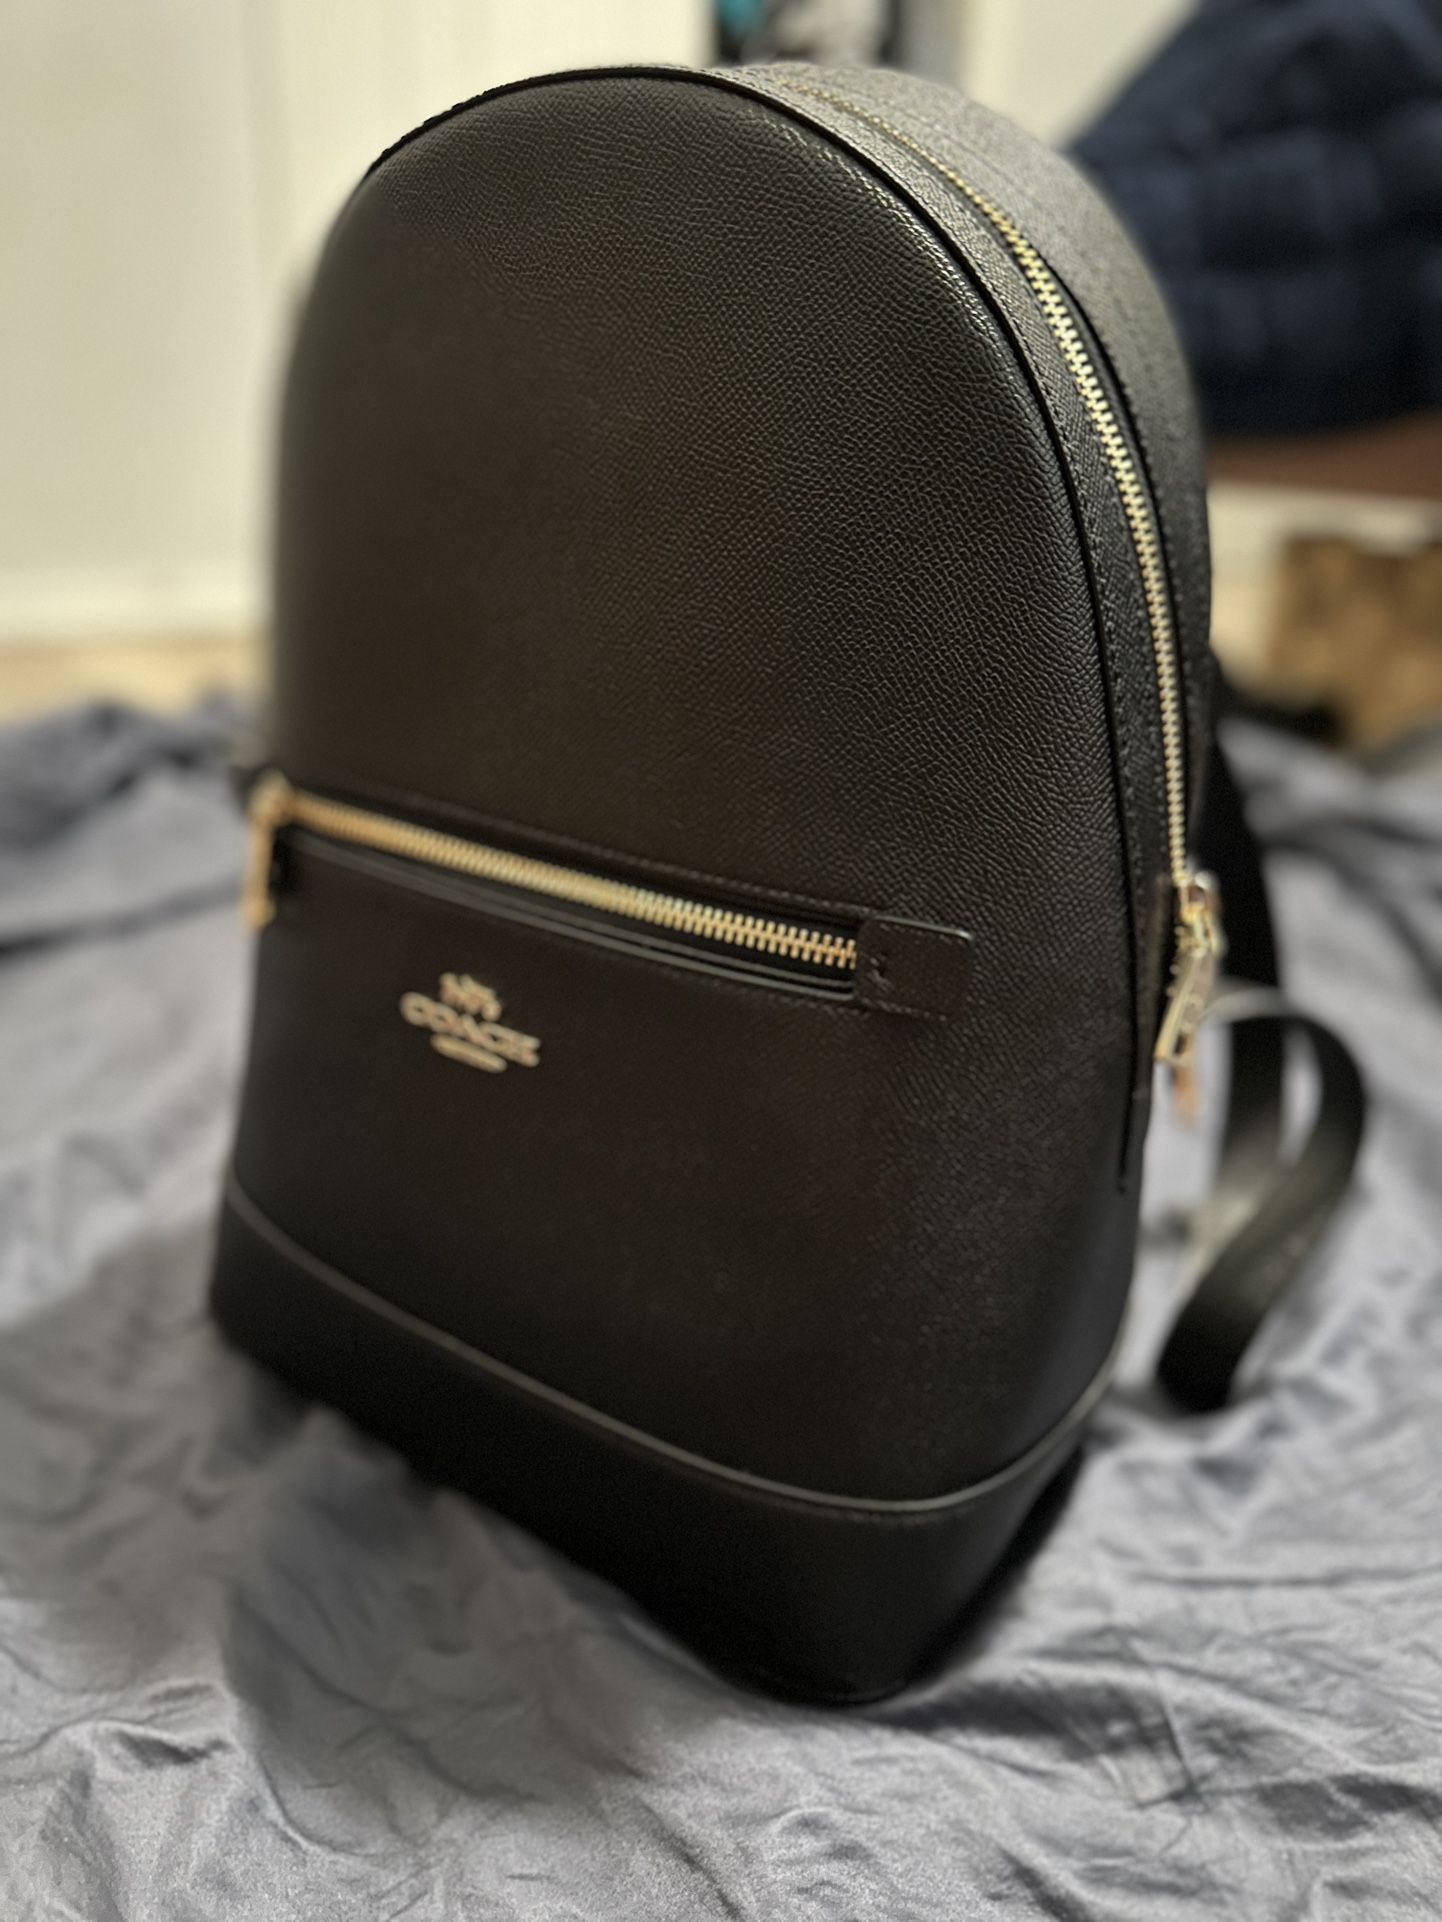 Louis Vuitton Luggage Bag for Sale in Salem, OR - OfferUp